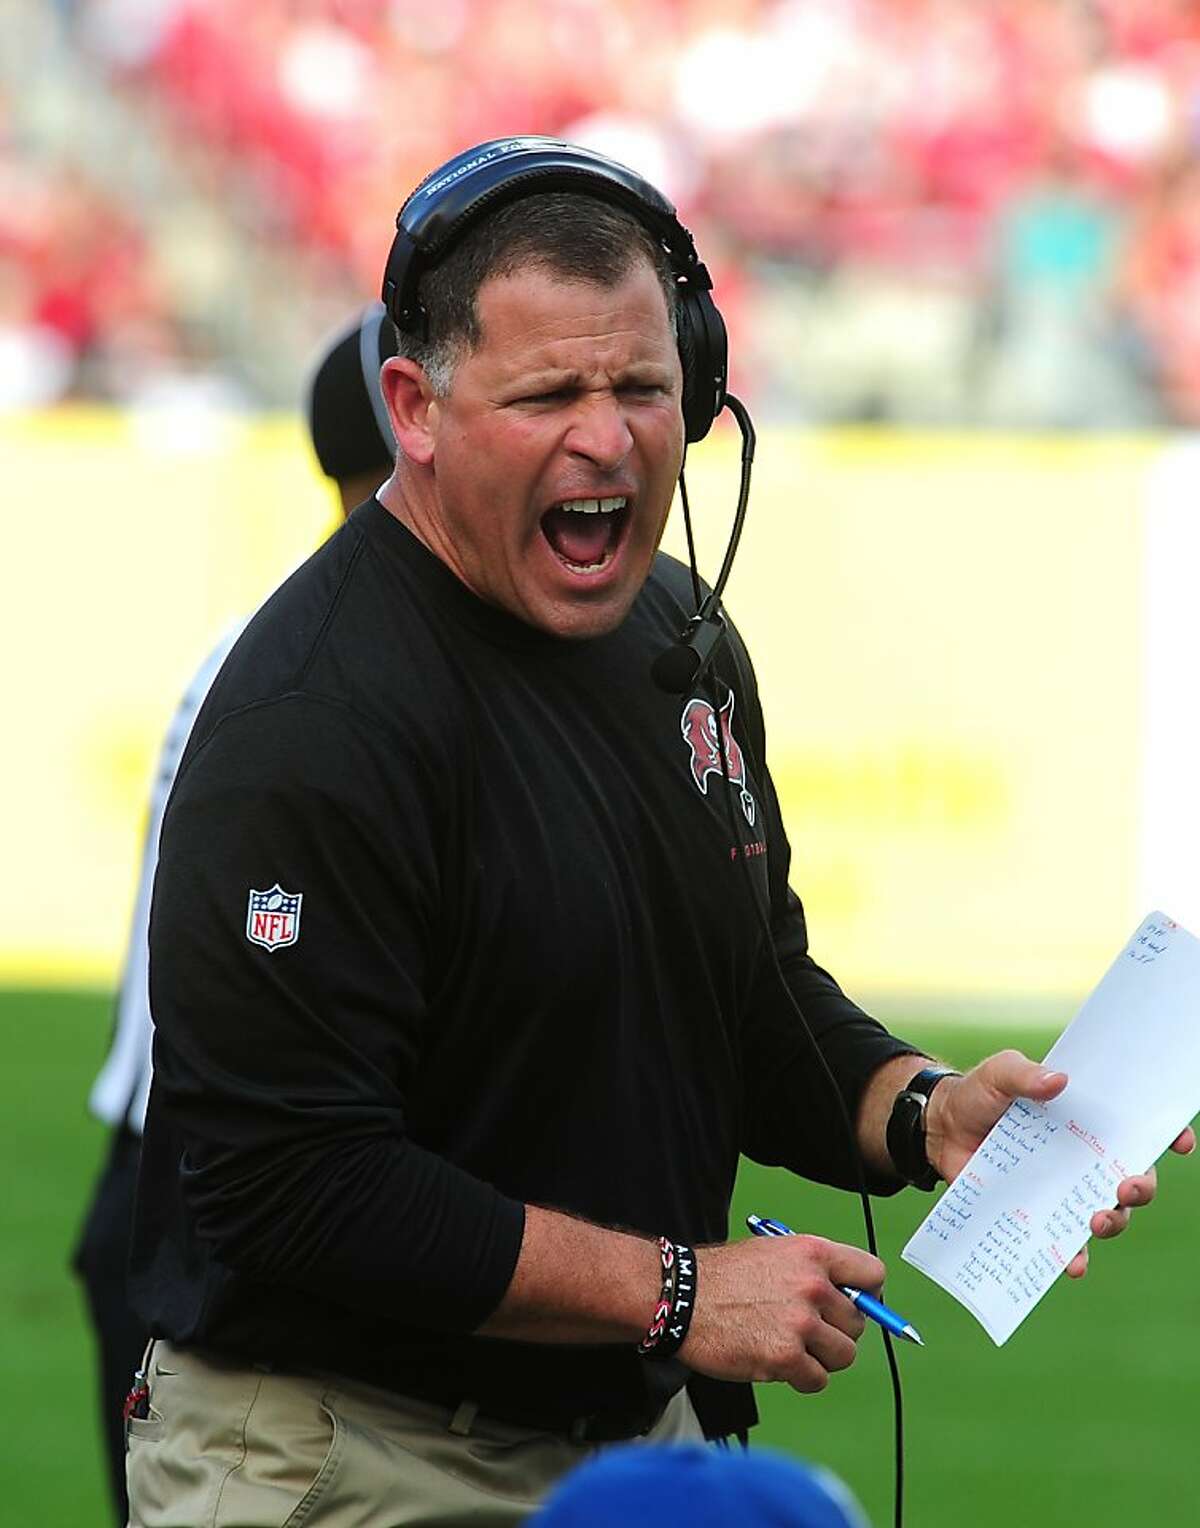 TAMPA, FL - DECEMBER 8: Head Coach Greg Schiano of the Tampa Bay Buccaneers disputes a call during the game against the Buffalo Bills at Raymond James Stadium on December 8 2013 in Tampa, Florida. (Photo by Scott Cunningham/Getty Images)